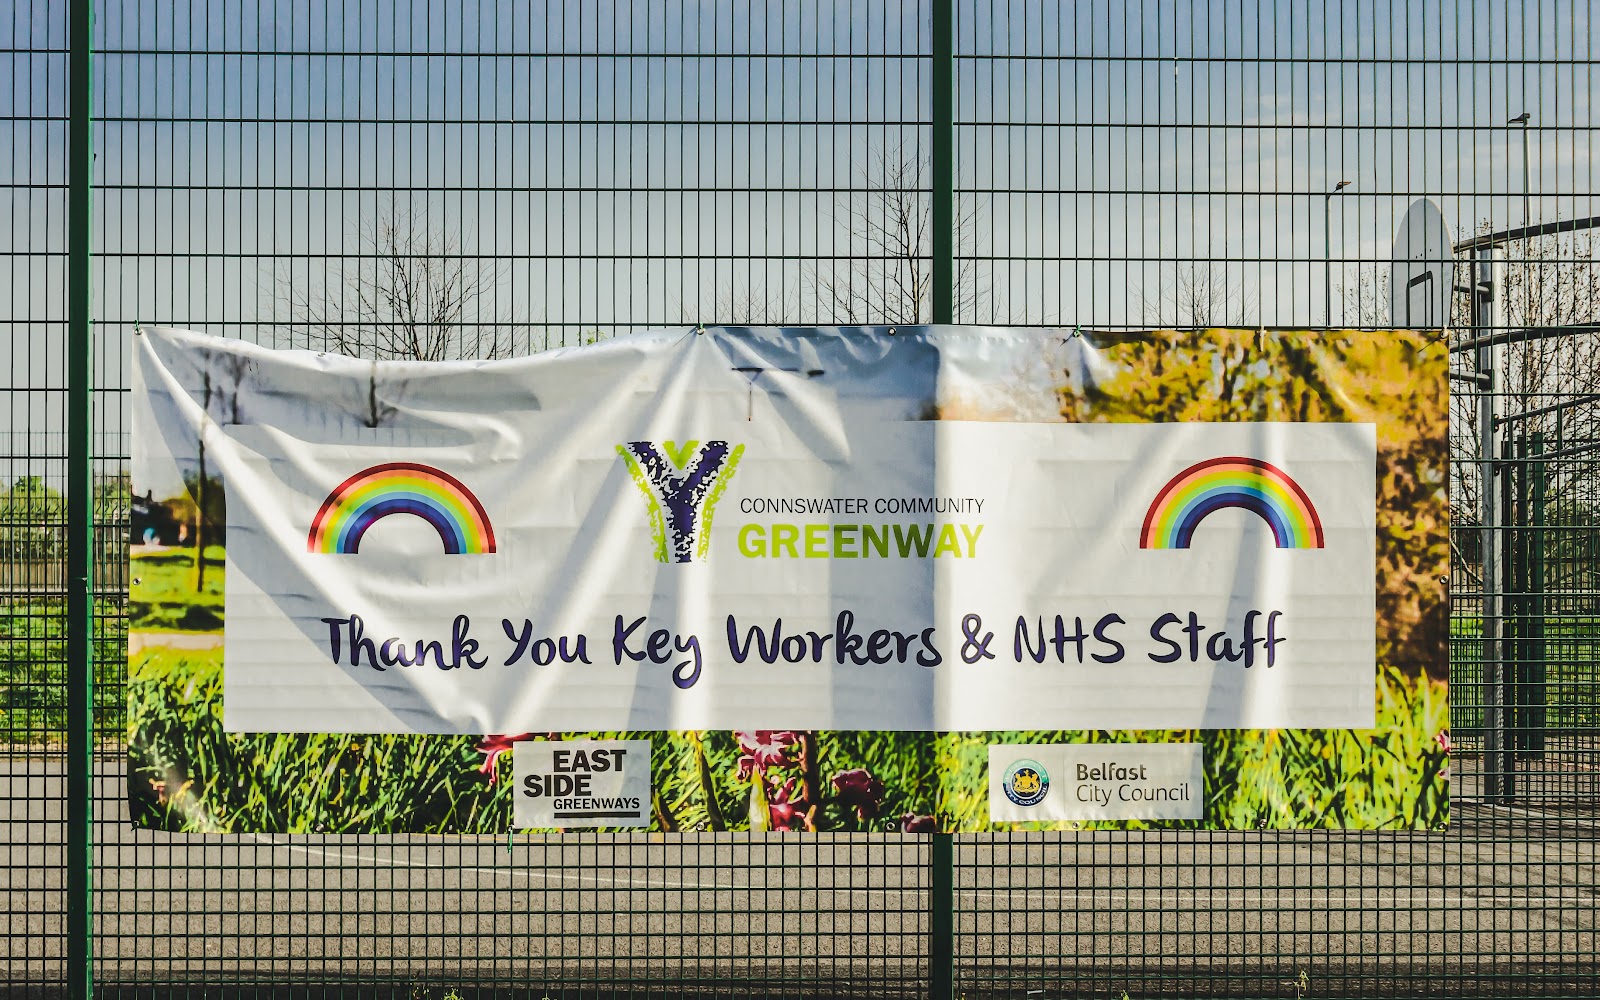 Banner hanging on a fence thanking key workers and staff